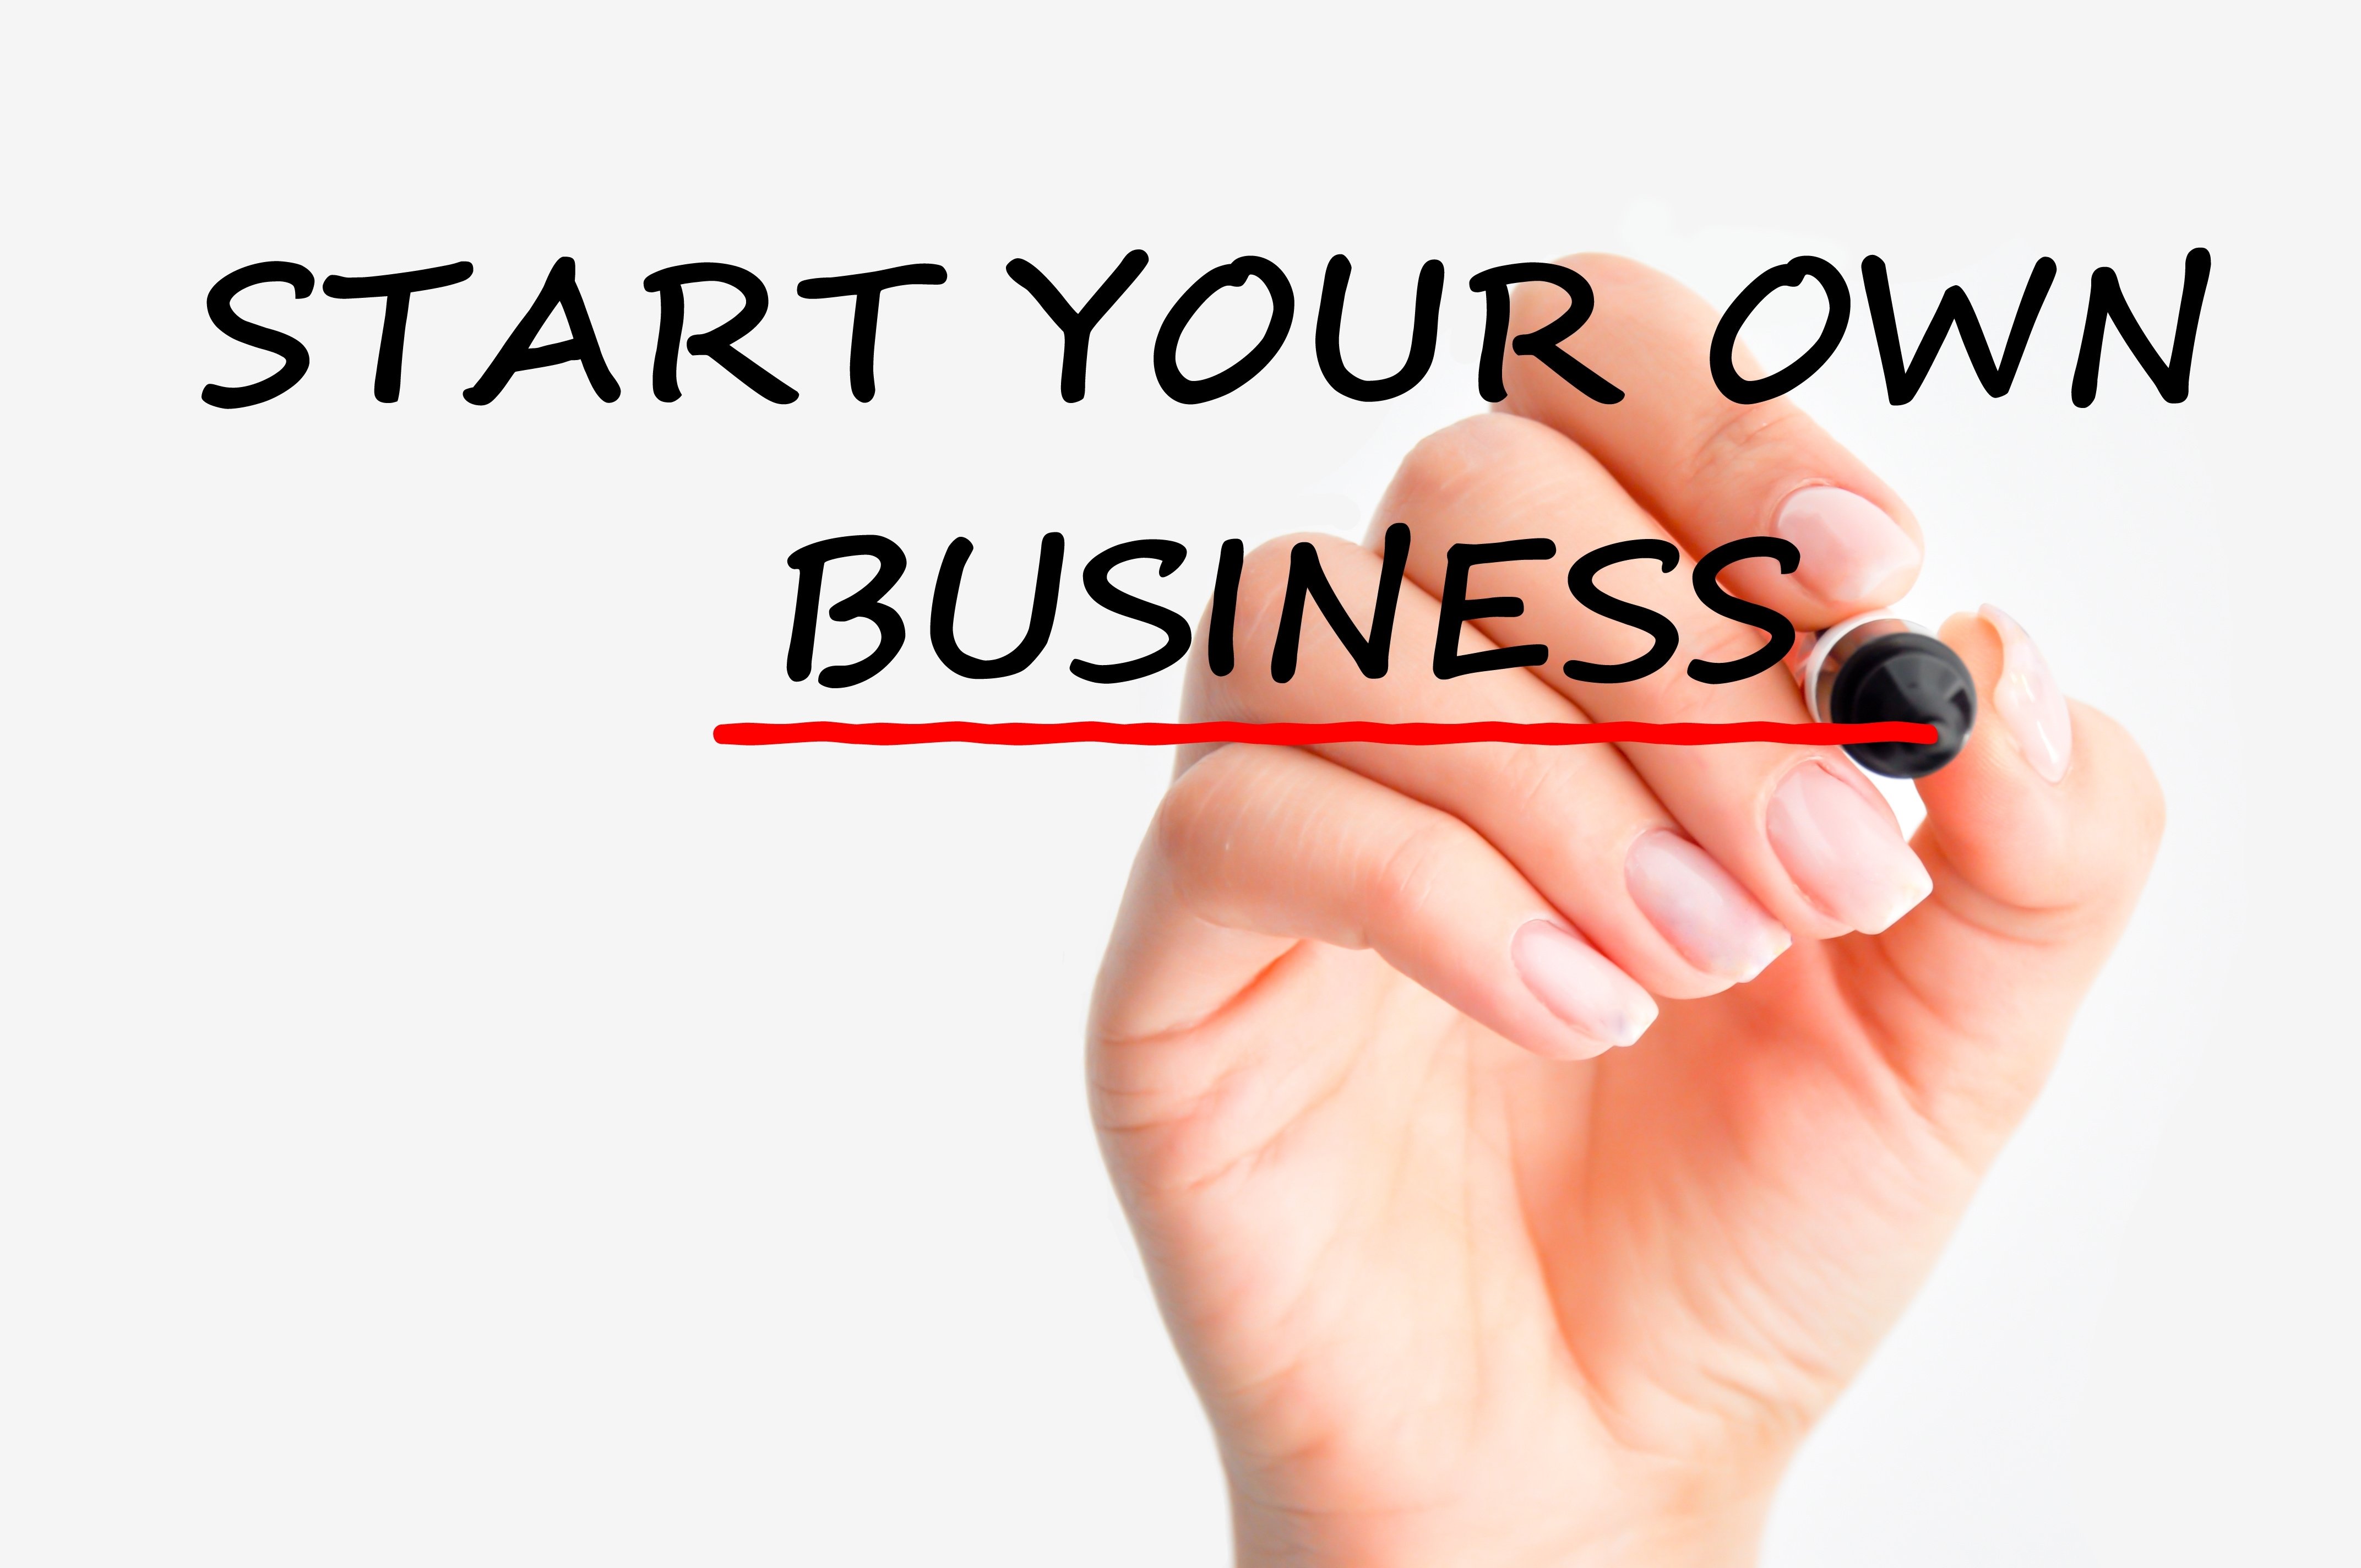 10 Great Ideas For Your Own Business 10 low cost ideas to start your own business start your business 7 2022